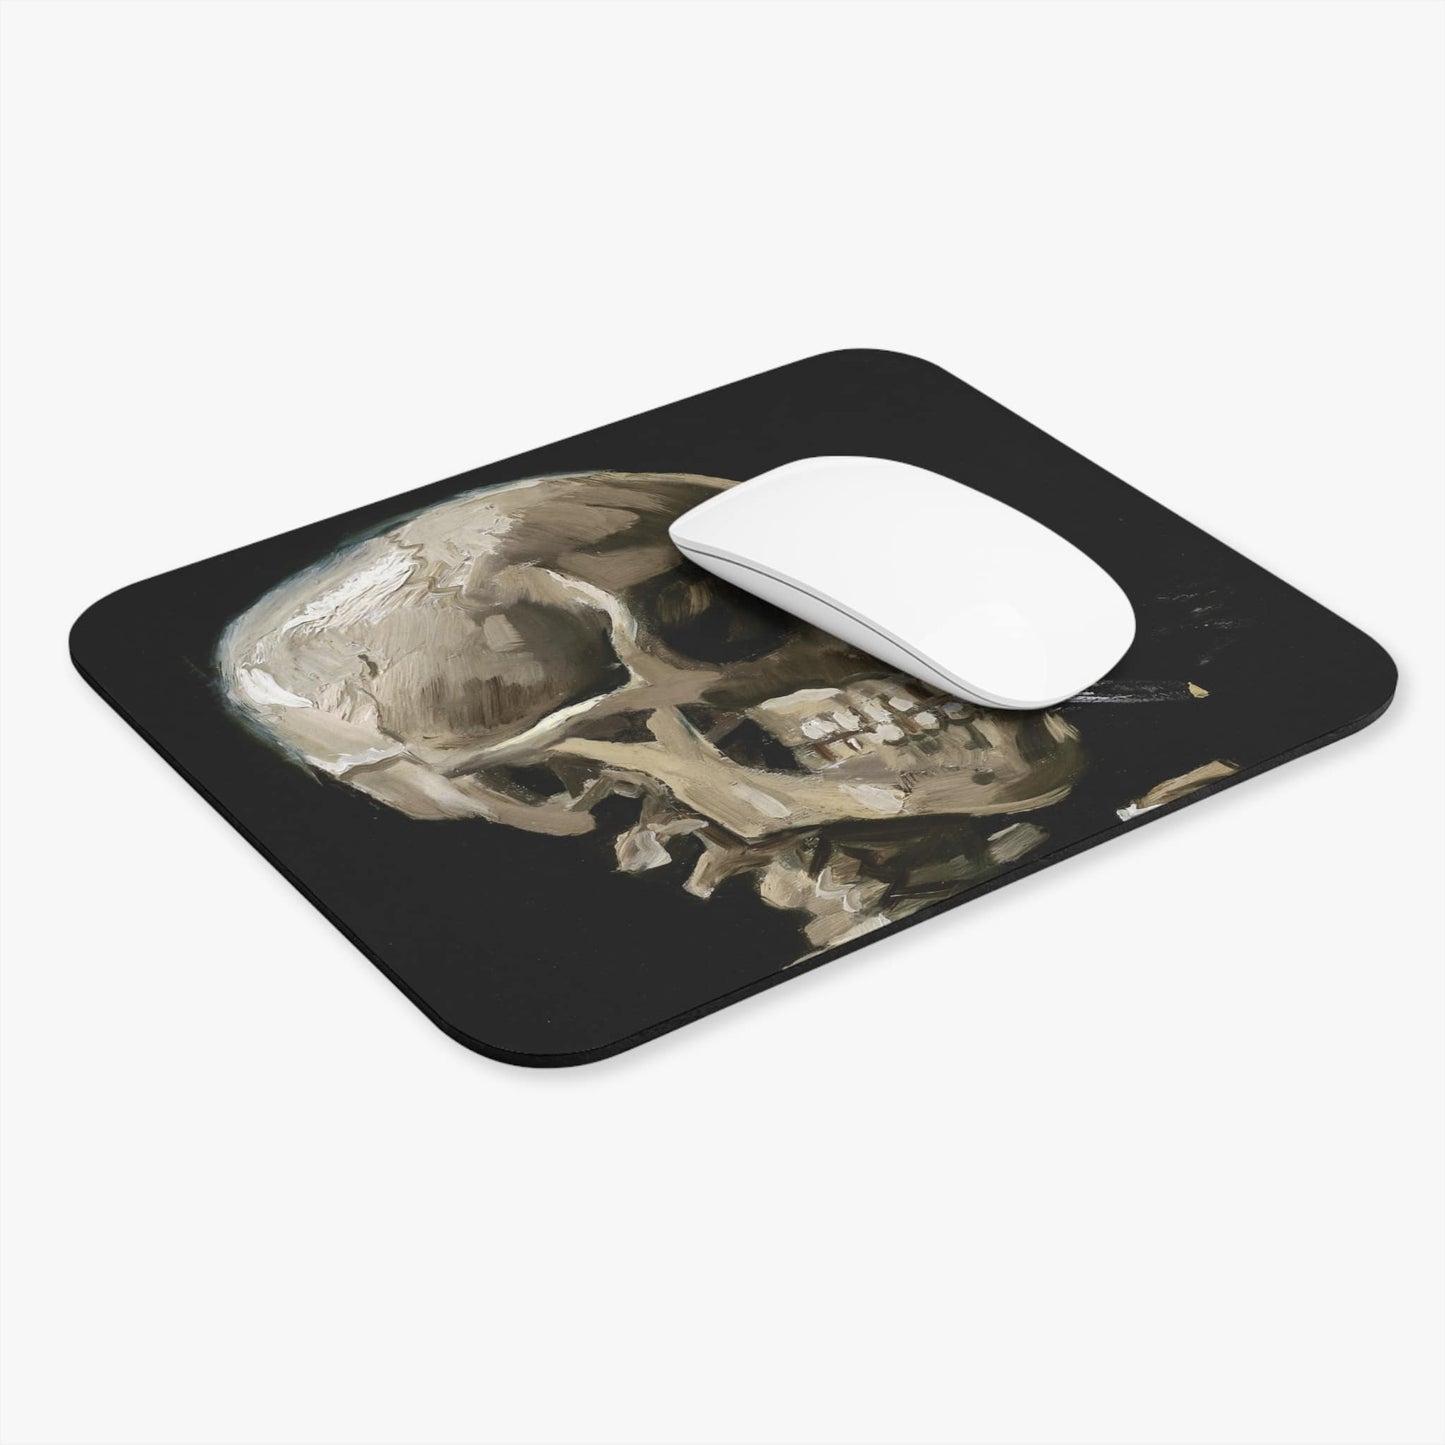 Famous Skull Computer Desk Mouse Pad With White Mouse